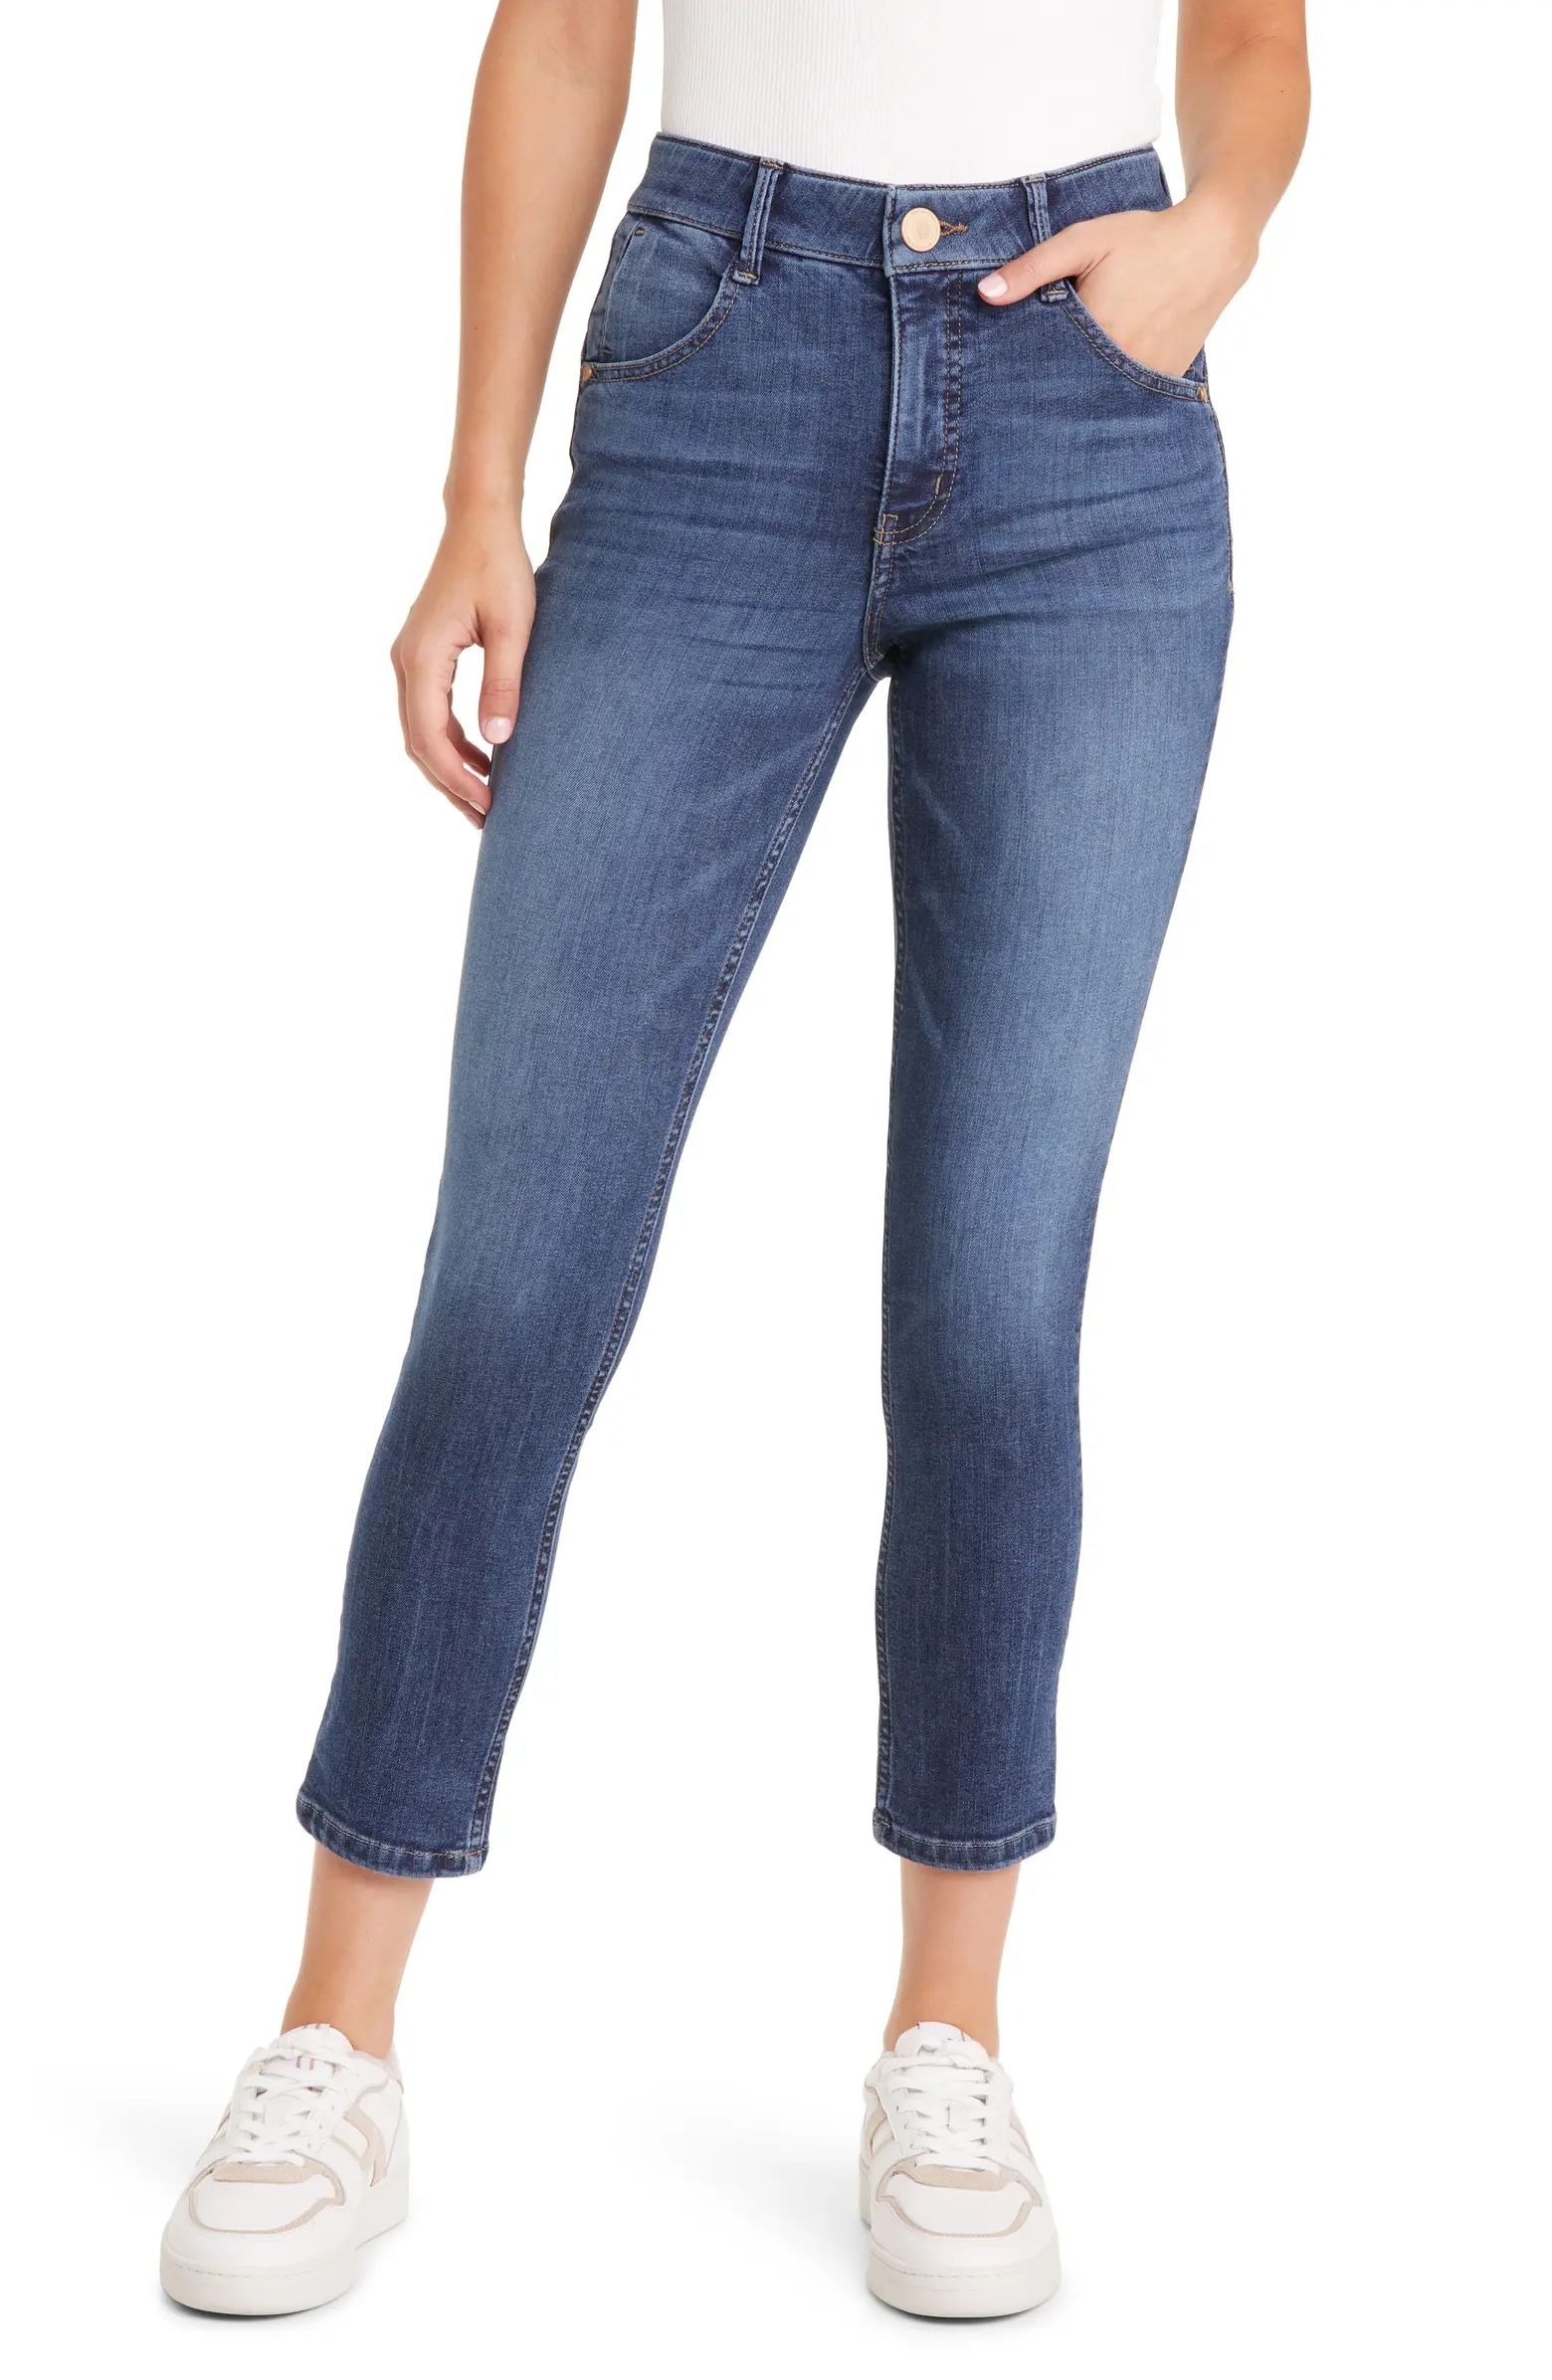 Waist & Waste 'Ab'Solution High Waist Ankle Skinny Jeans | Nordstrom